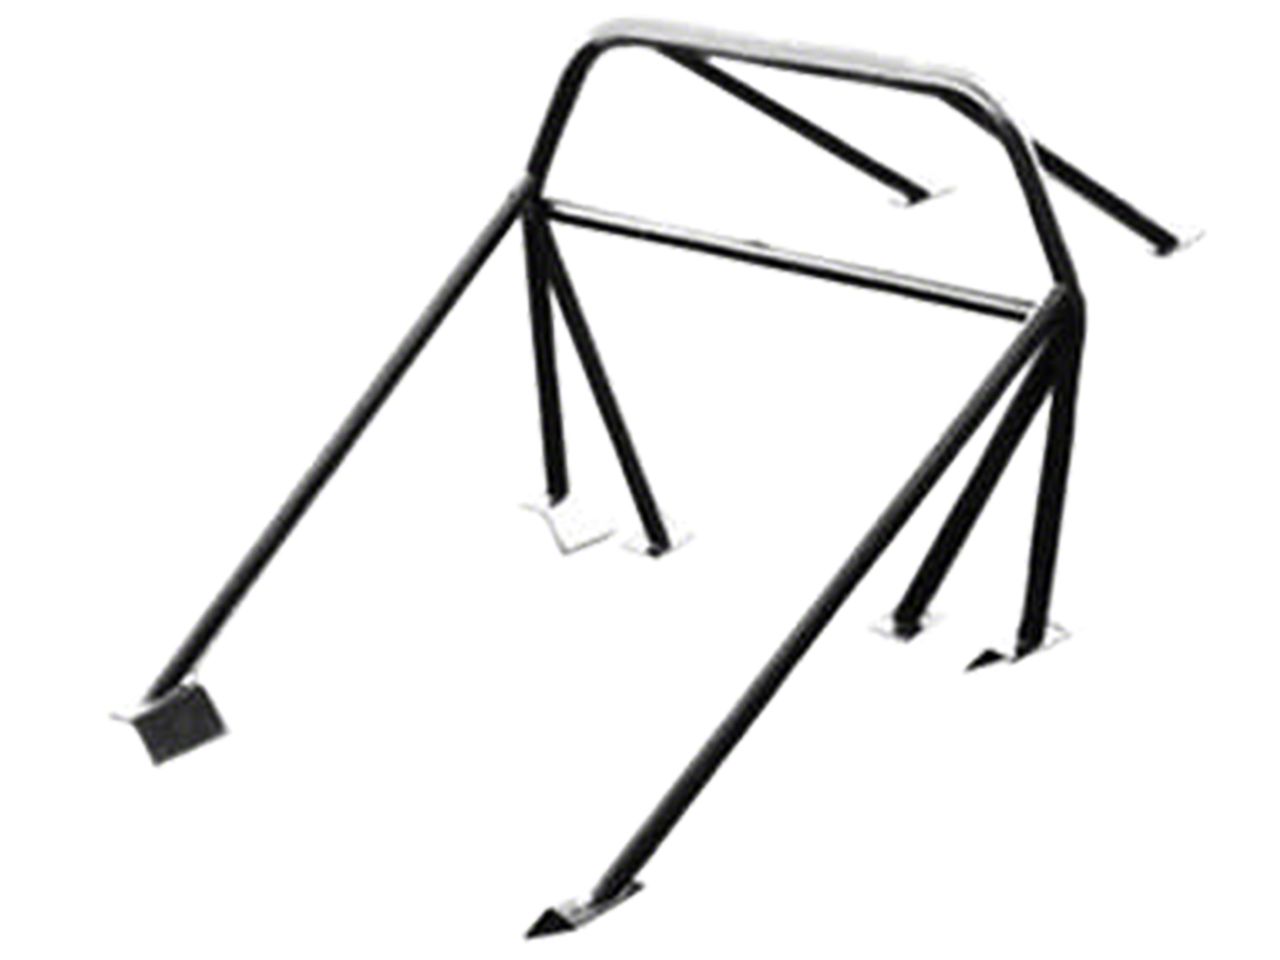 Corvette Roll Bars & Roll Cages 1953-1962